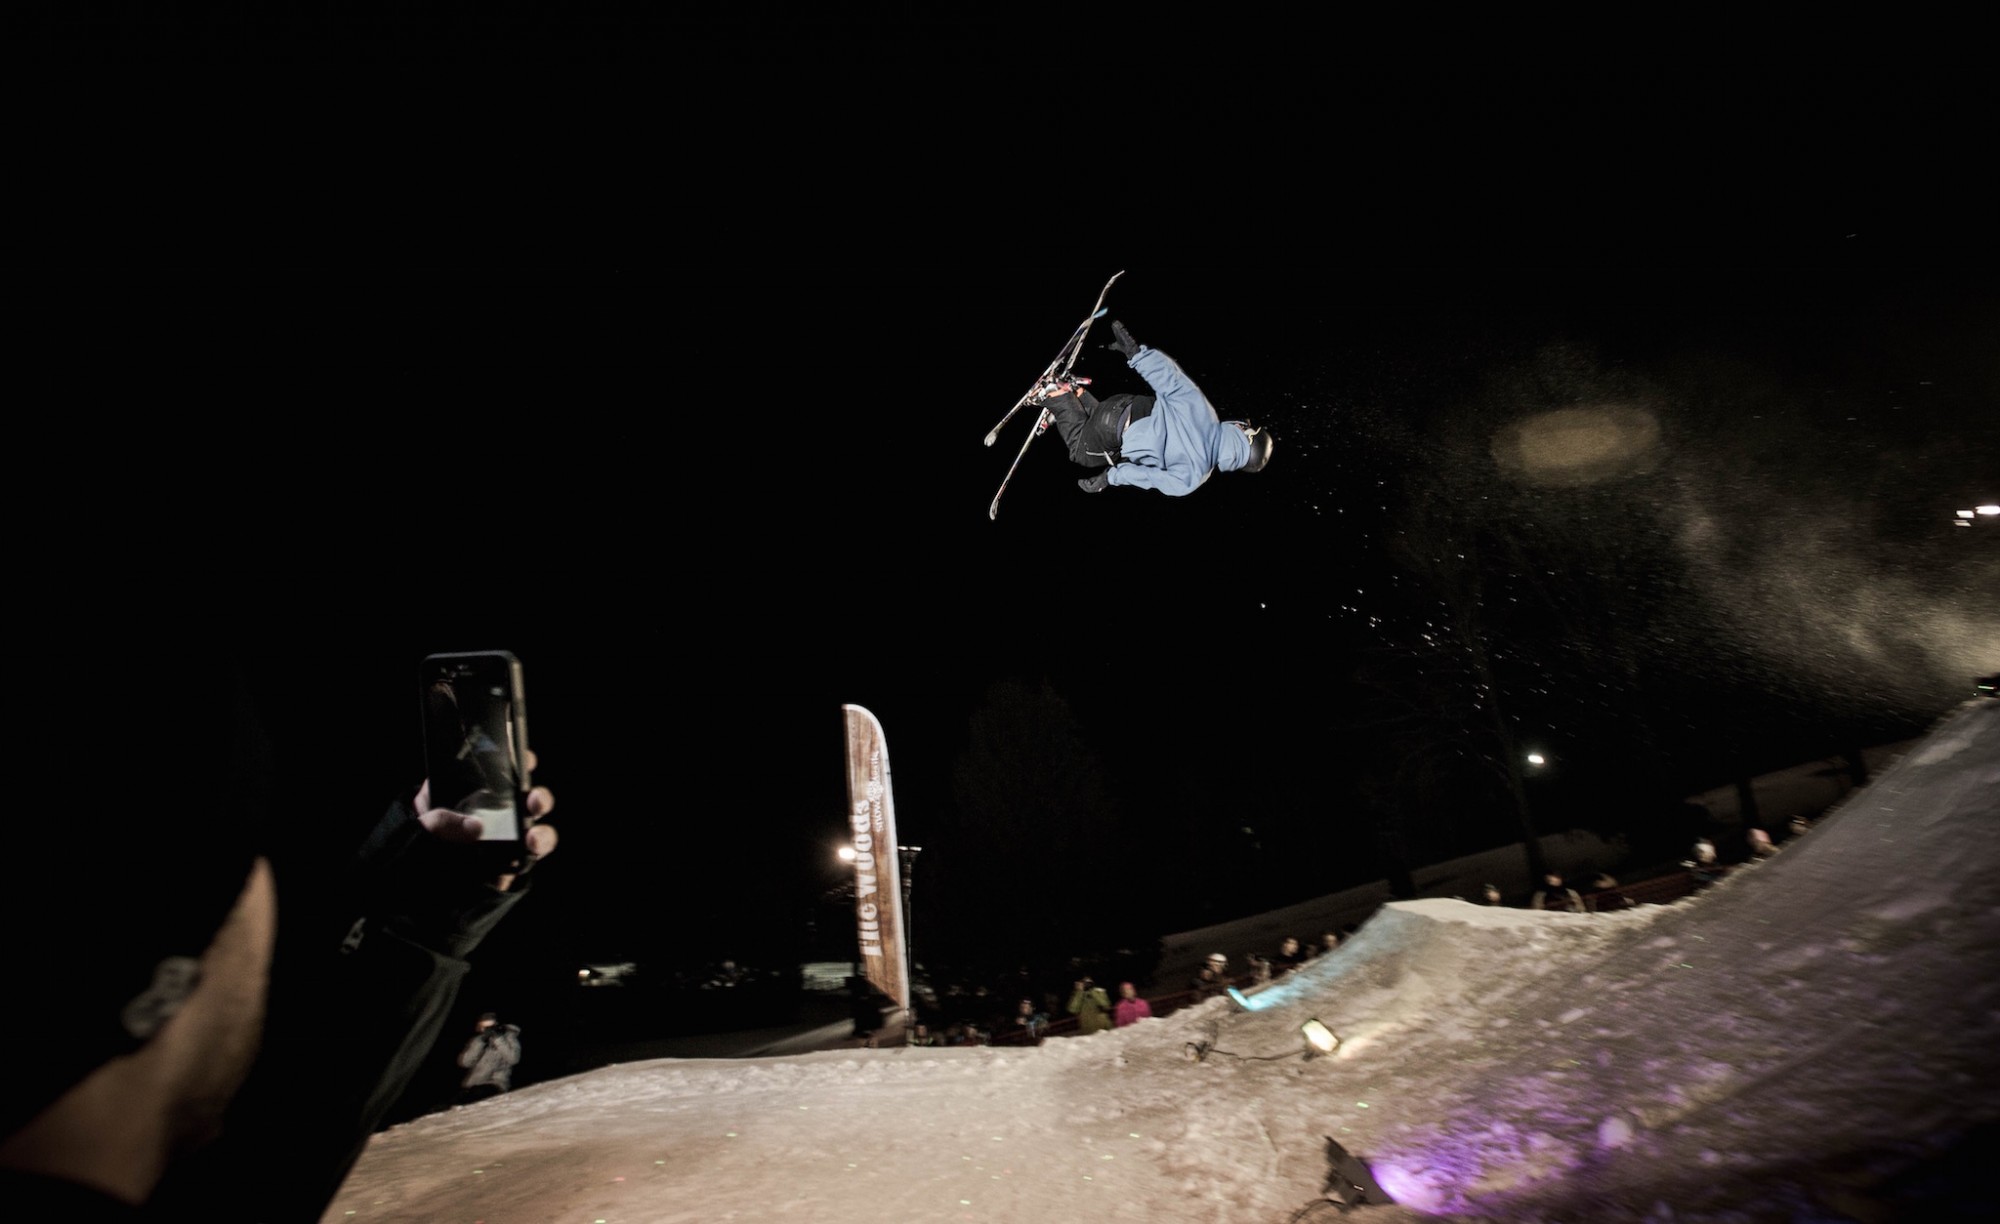 Big Air Competition at Snow Trails